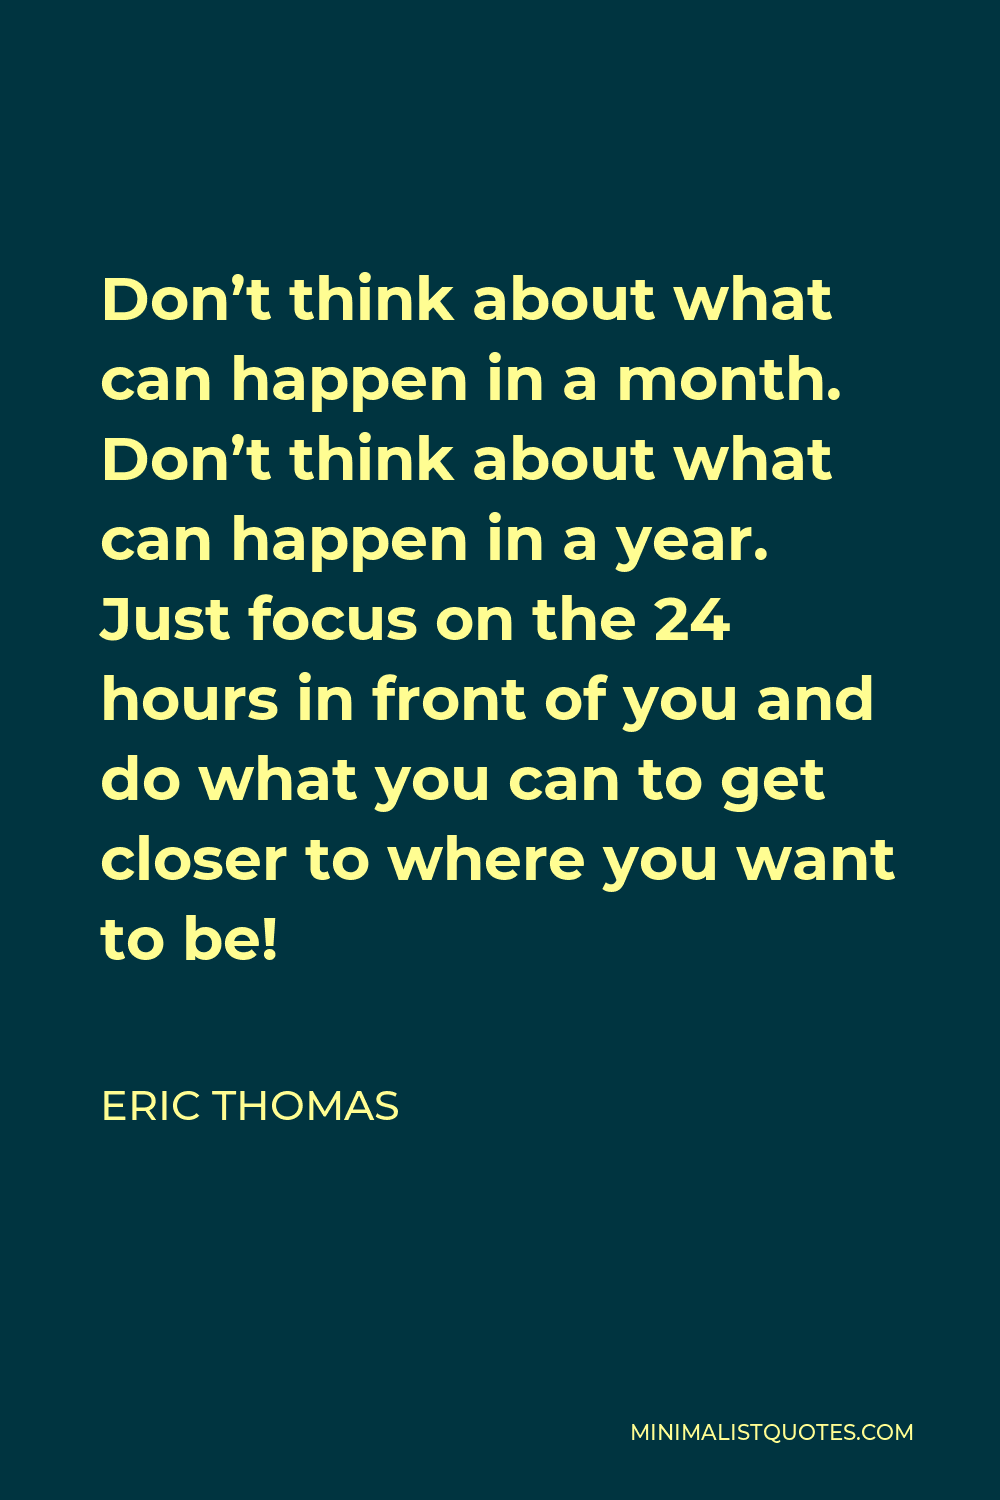 Eric Thomas Quote - Don’t think about what can happen in a month. Don’t think about what can happen in a year. Just focus on the 24 hours in front of you and do what you can to get closer to where you want to be!